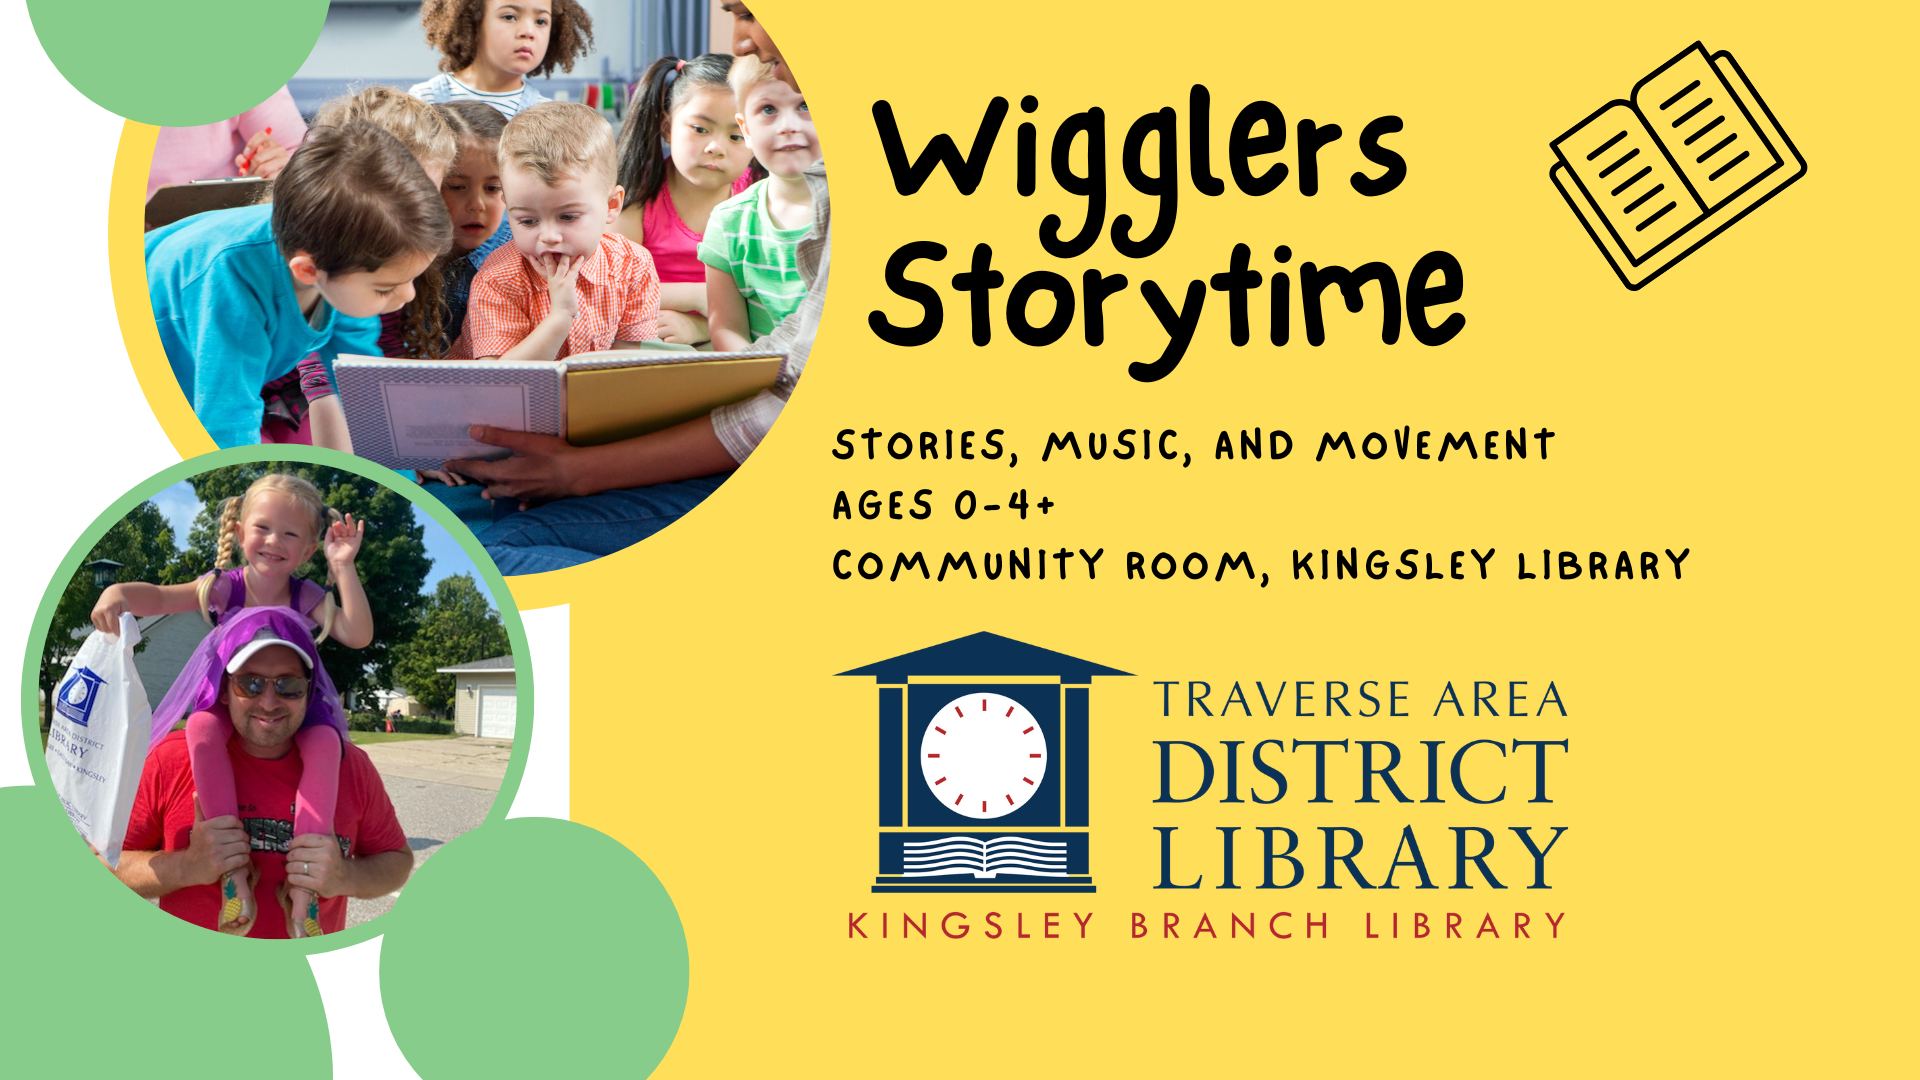 Wigglers storytime, Kingsley Branch Library, 10:30a on Tuesdays and Wednesdays except when Kingsley Schools is not in session.